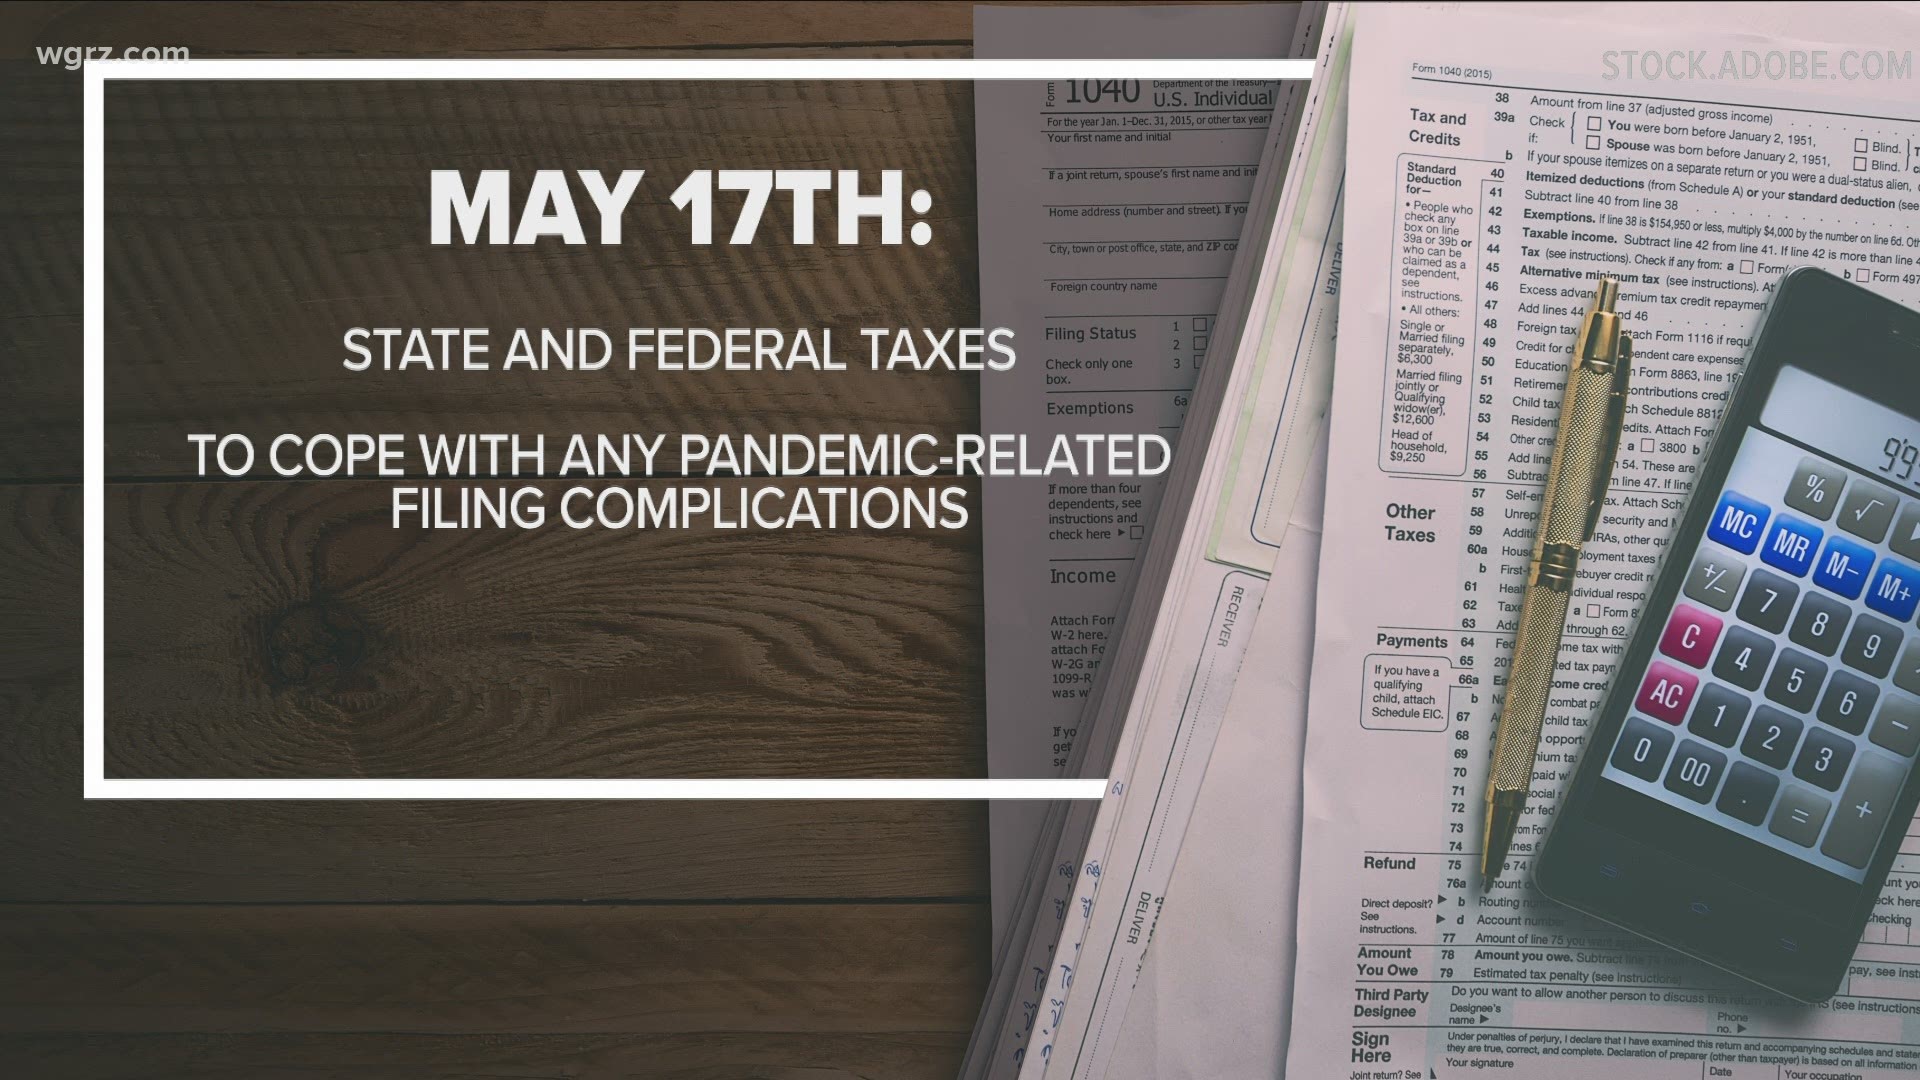 You now have until May 17 to do your state and federal taxes. The 30-day extensions, is to compensate for those who are dealing with pandemic-related complications.